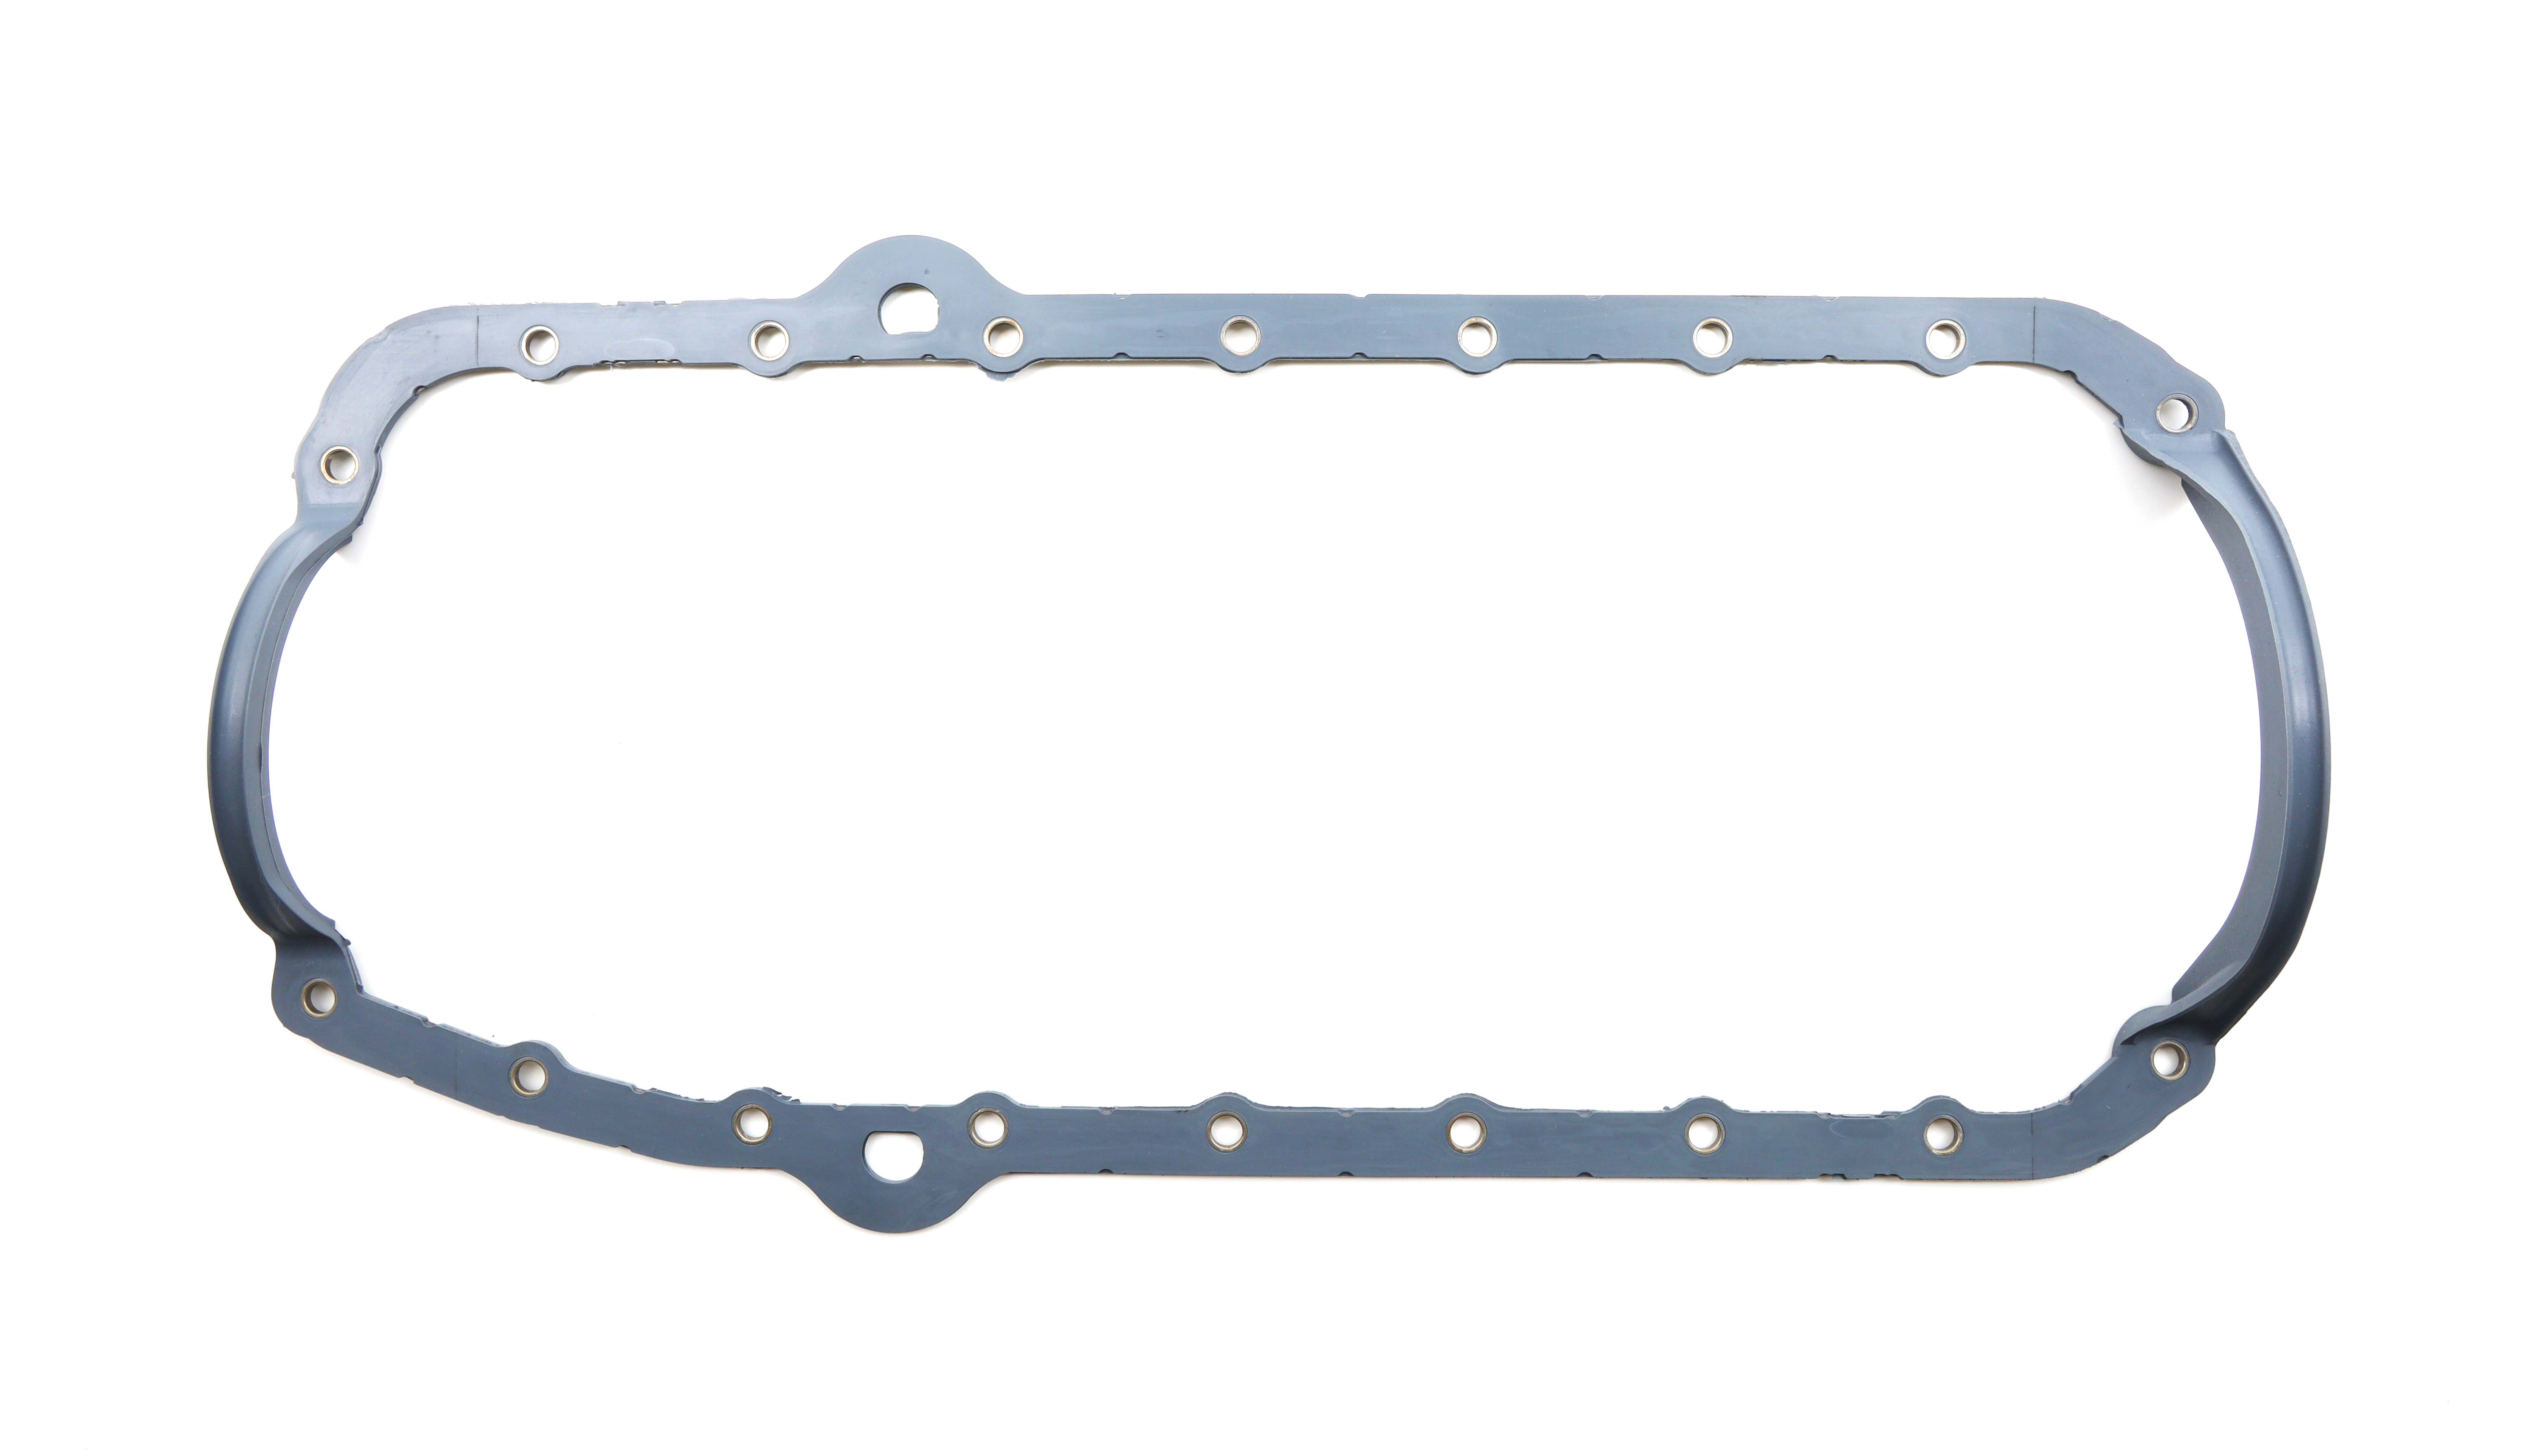 Cometic Gaskets C15546 - Oil Pan Gaskets, 1 Piece, Steel Core Rubber, Small Block Chevy 1955-85, Each